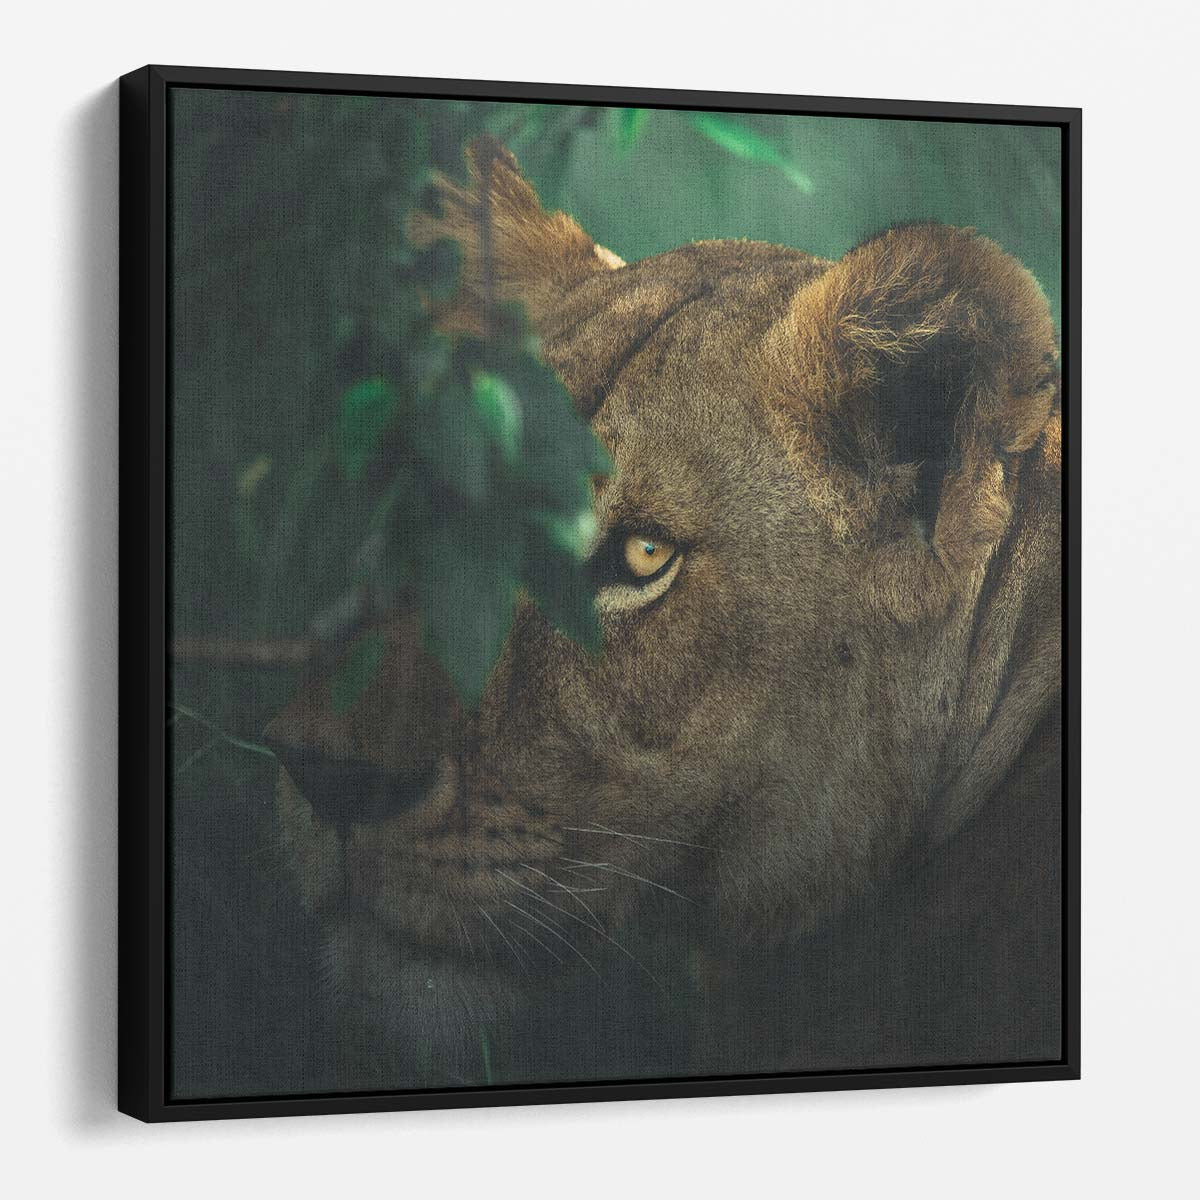 Lioness with Green Eyes Wildlife Photography Wall Art by Luxuriance Designs. Made in USA.